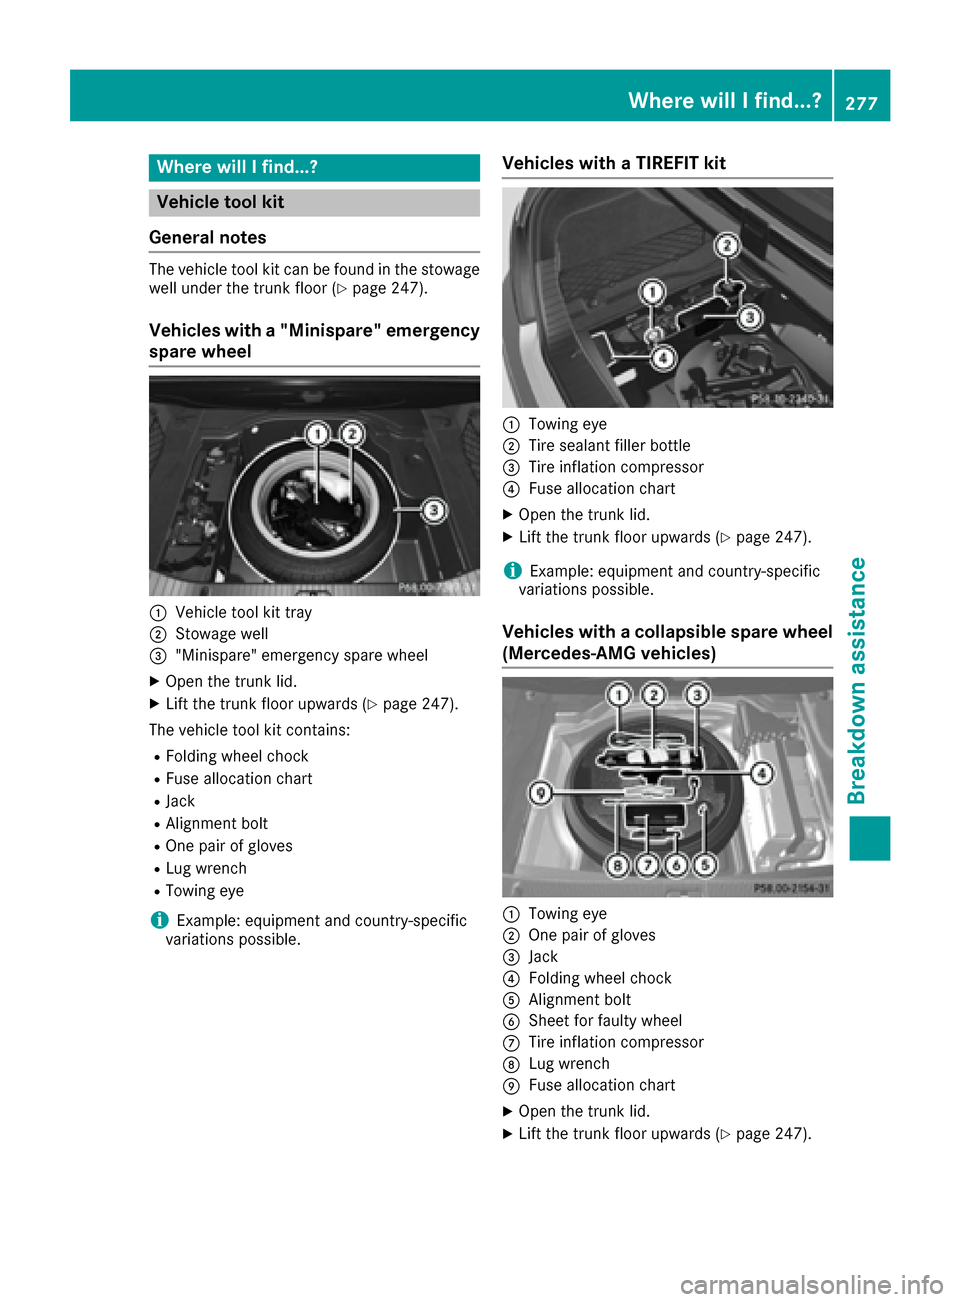 MERCEDES-BENZ CLS-Class 2017 W218 Owners Manual Where will I find...?
Vehicle tool kit
General notes
The vehicle tool kit can be found in the stowage
well under the trunk floor (Ypage 247).
Vehicles with a "Minispare" emergency
spare wheel
:Vehicle